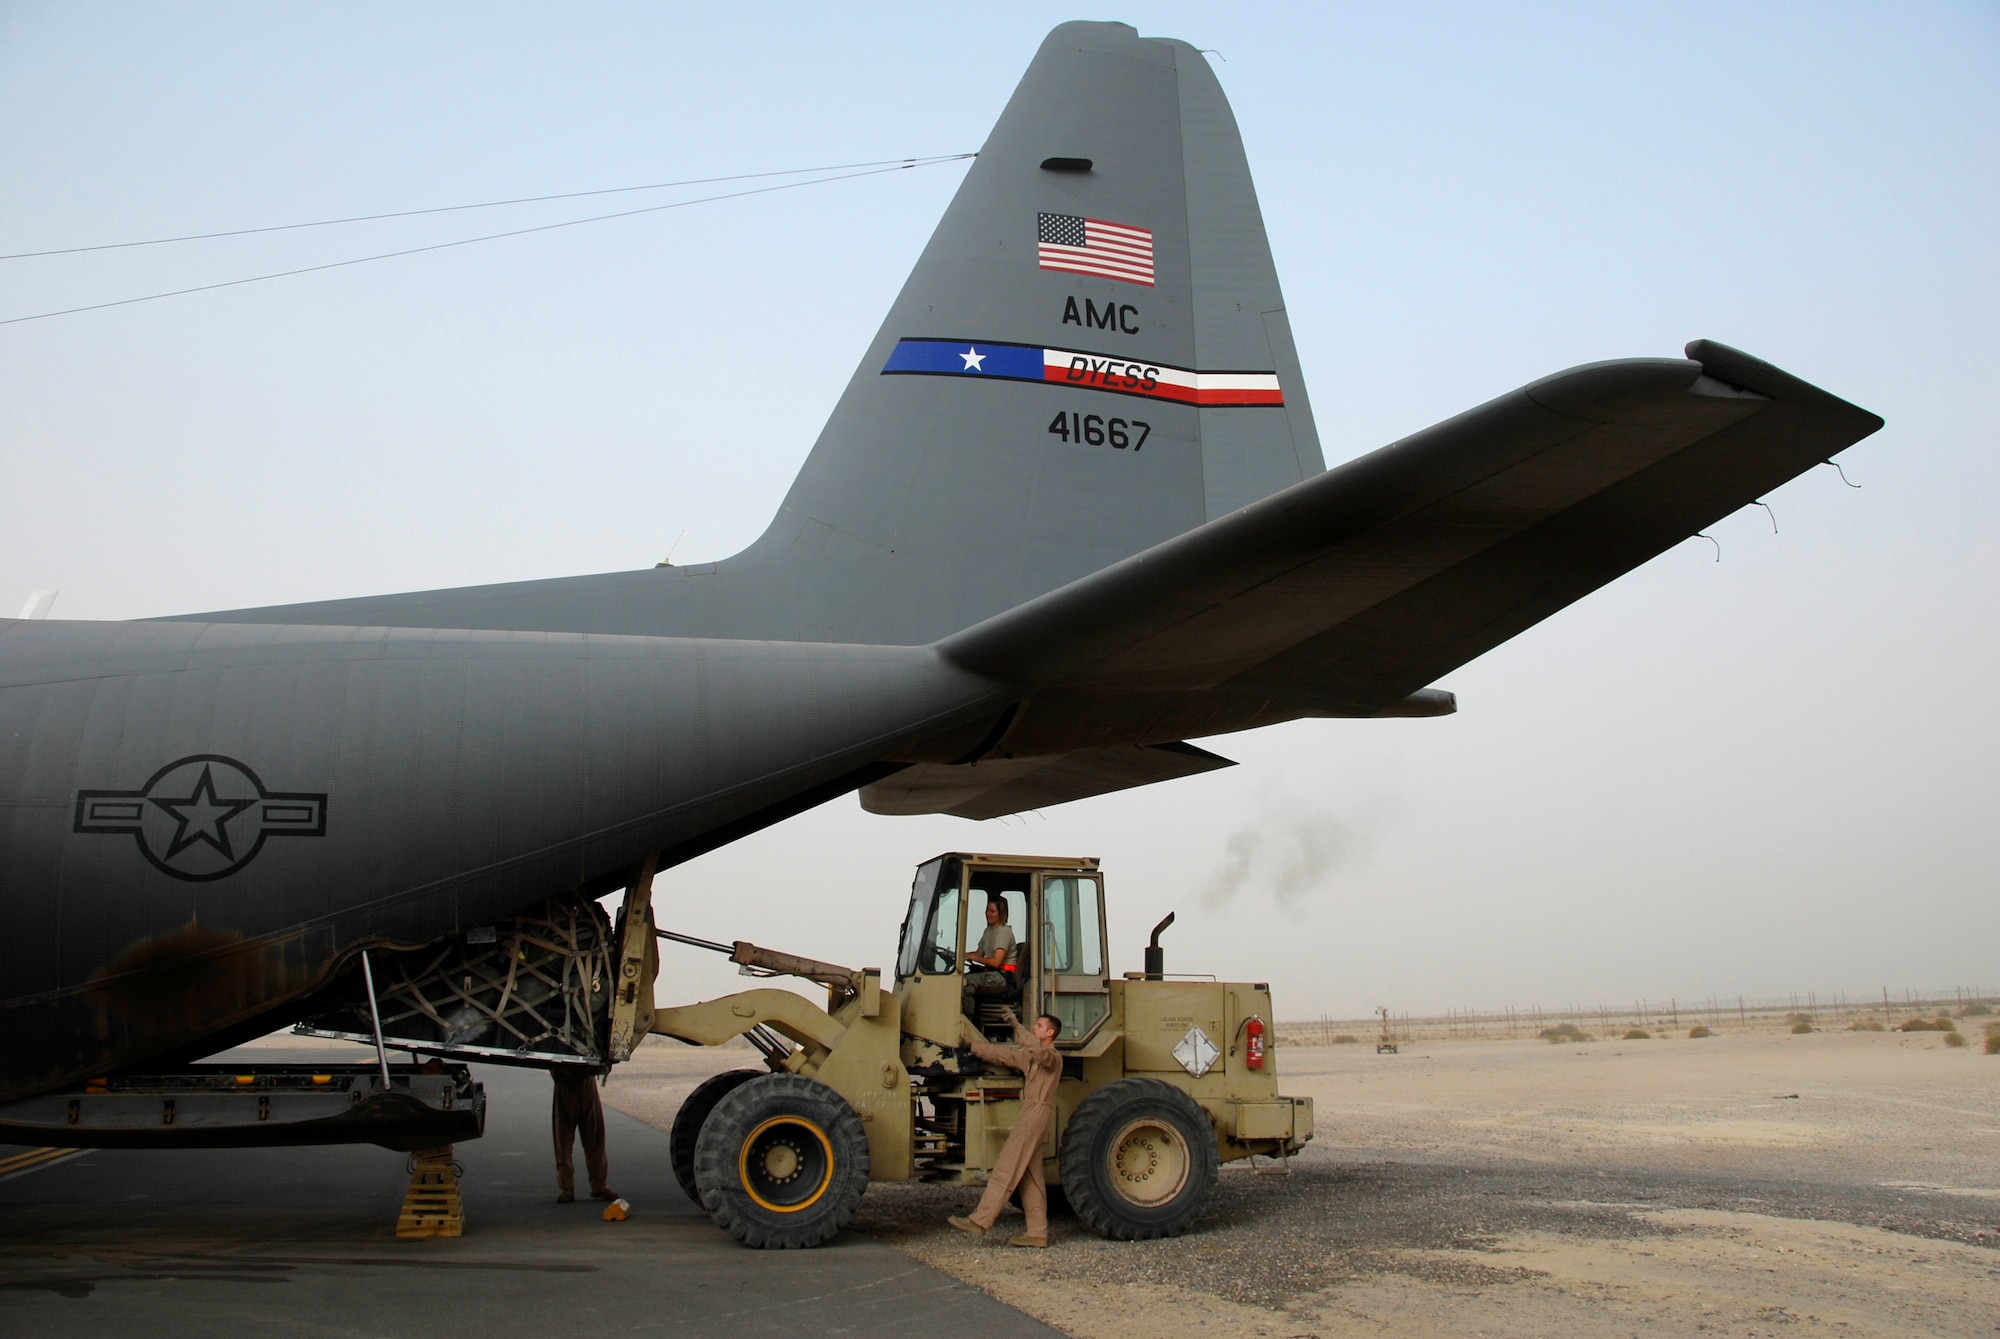 SOUTHWEST ASIA -- Senior Airman Zachary Kelhi, a C-130 Hercules loadmaster deployed to the 737th Expeditionary Airlift Squadron, marshals a 463L cargo pallet onto the aircraft in preparation for the combat sortie that transported Soldiers into Iraq April 21, 2008, from an air base in the Persian Gulf Region. The Air Force recently surpassed more than one million sorties flown by Air Force aircraft in the Global War on Terror since Sept. 11, 2001. Synchronized and integrated into larger coalition air efforts, these missions represent the most deliberate, disciplined and precise air campaign in history. Airman Kelhi is deployed from the 39th Airlift Squadron, Dyess Air Force Base, Texas. (U.S. Air Force photo/ Staff Sgt. Patrick Dixon)